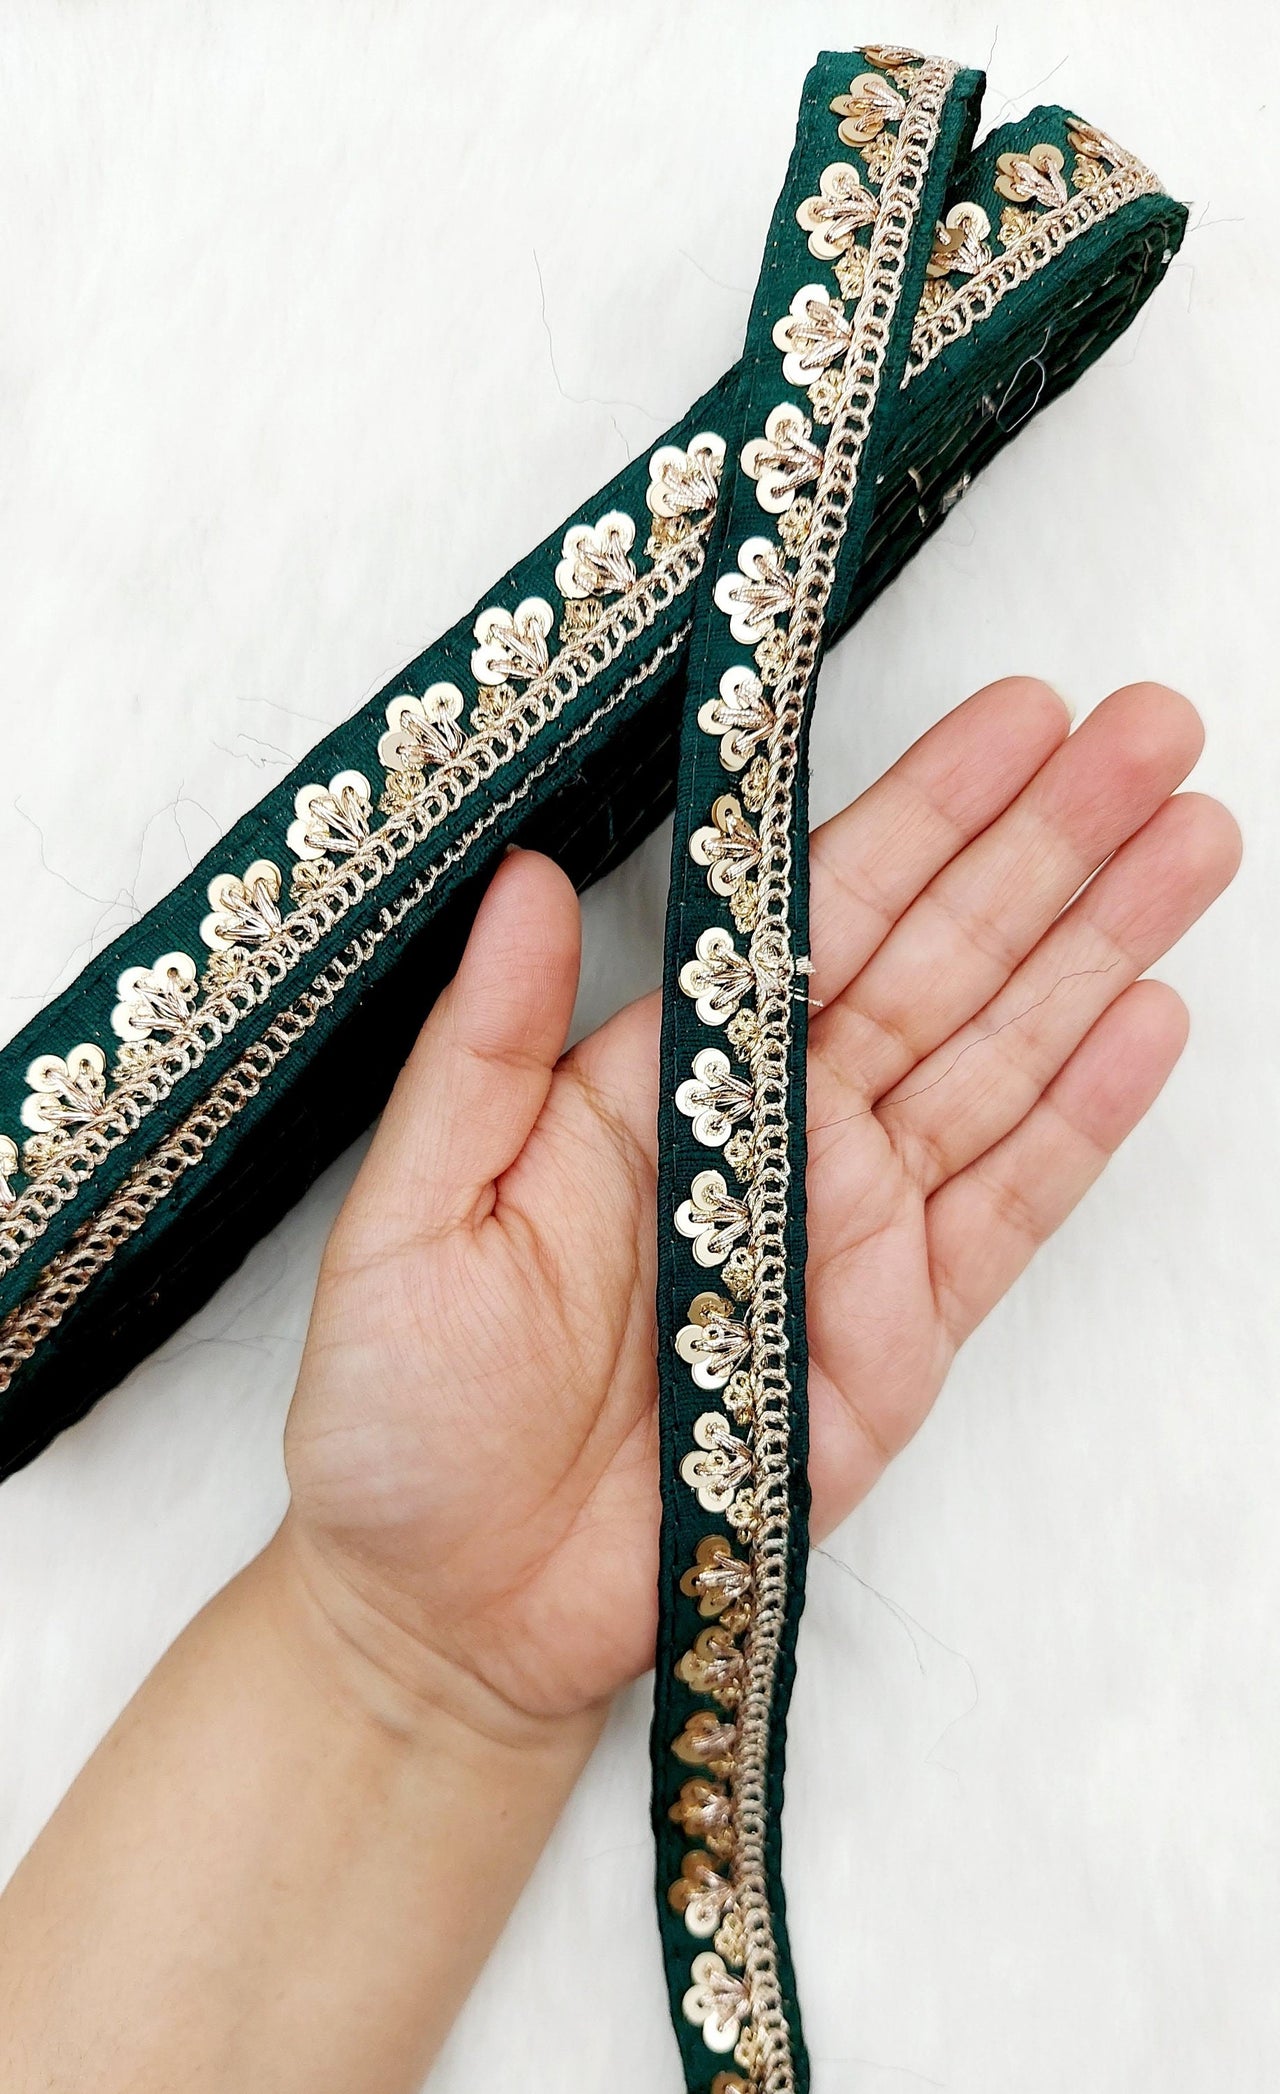 Art Silk Trim with Gold Embroidery and Sequins Indian Sari Border Trim By 3 Yards Decorative Trim Craft Lace